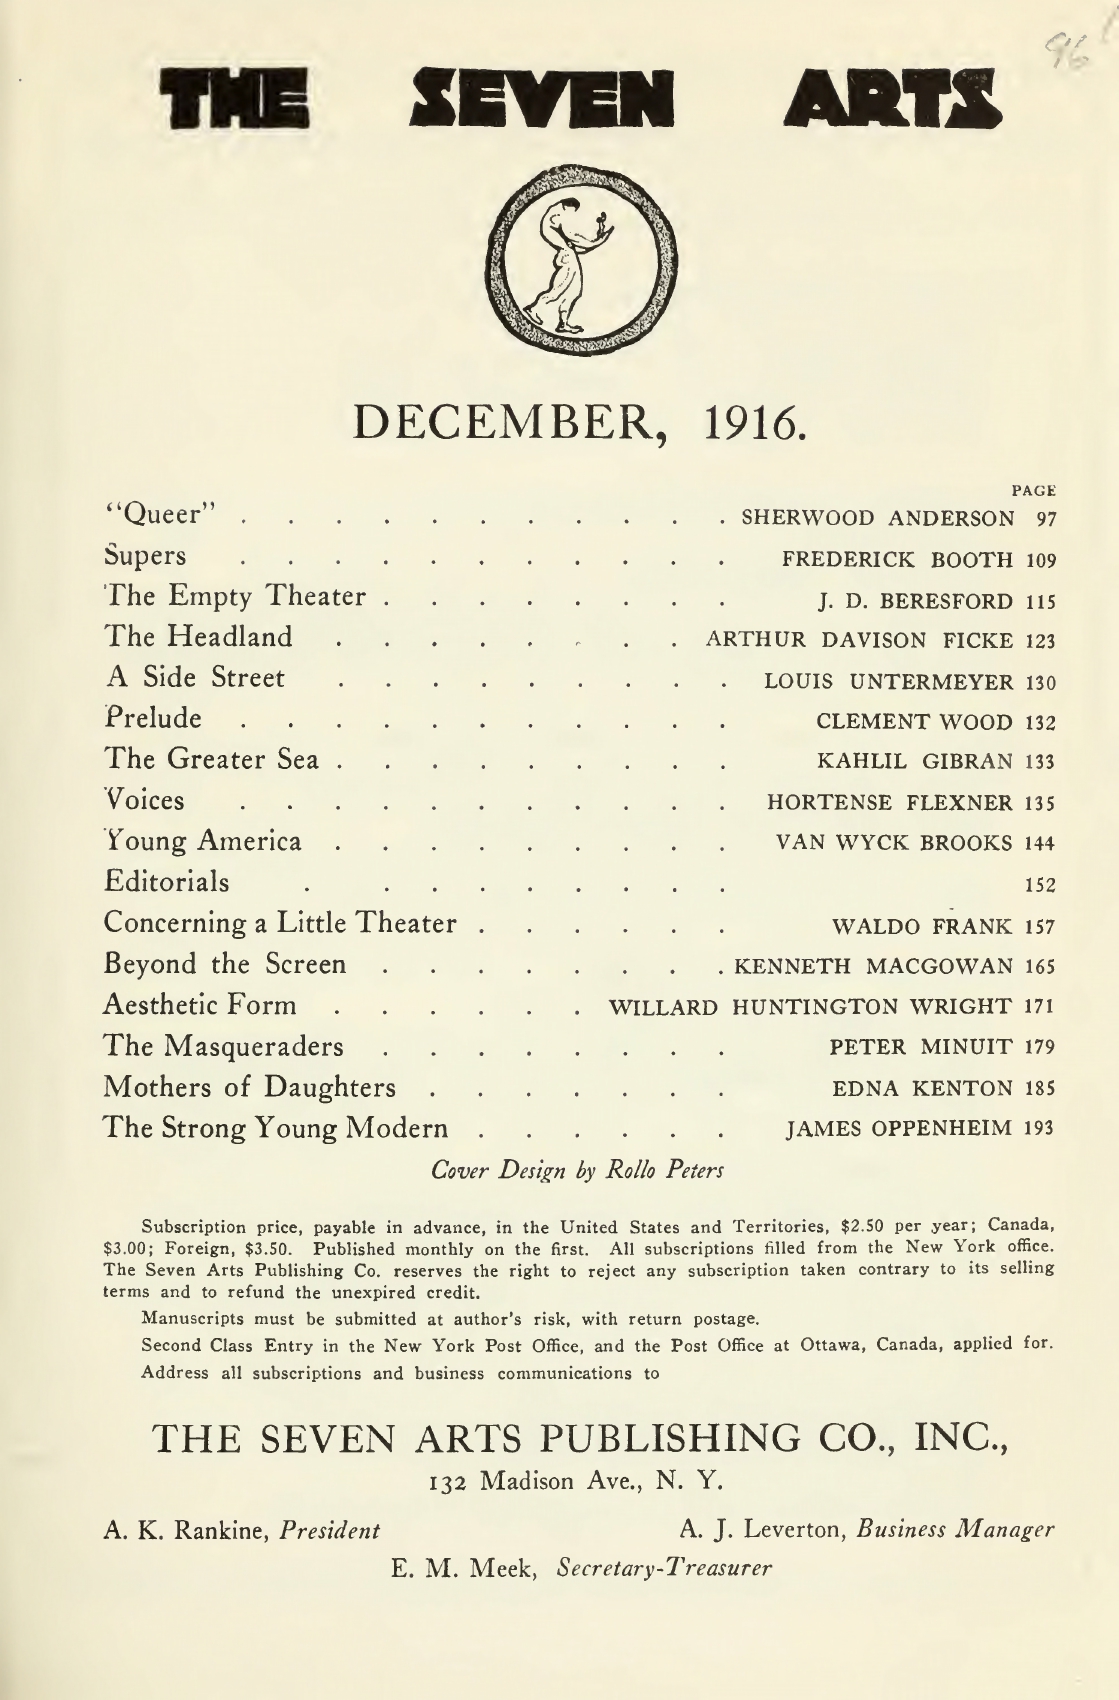 The Greater Sea (From the Drama, "The Madman"), The Seven Arts, December, 1916